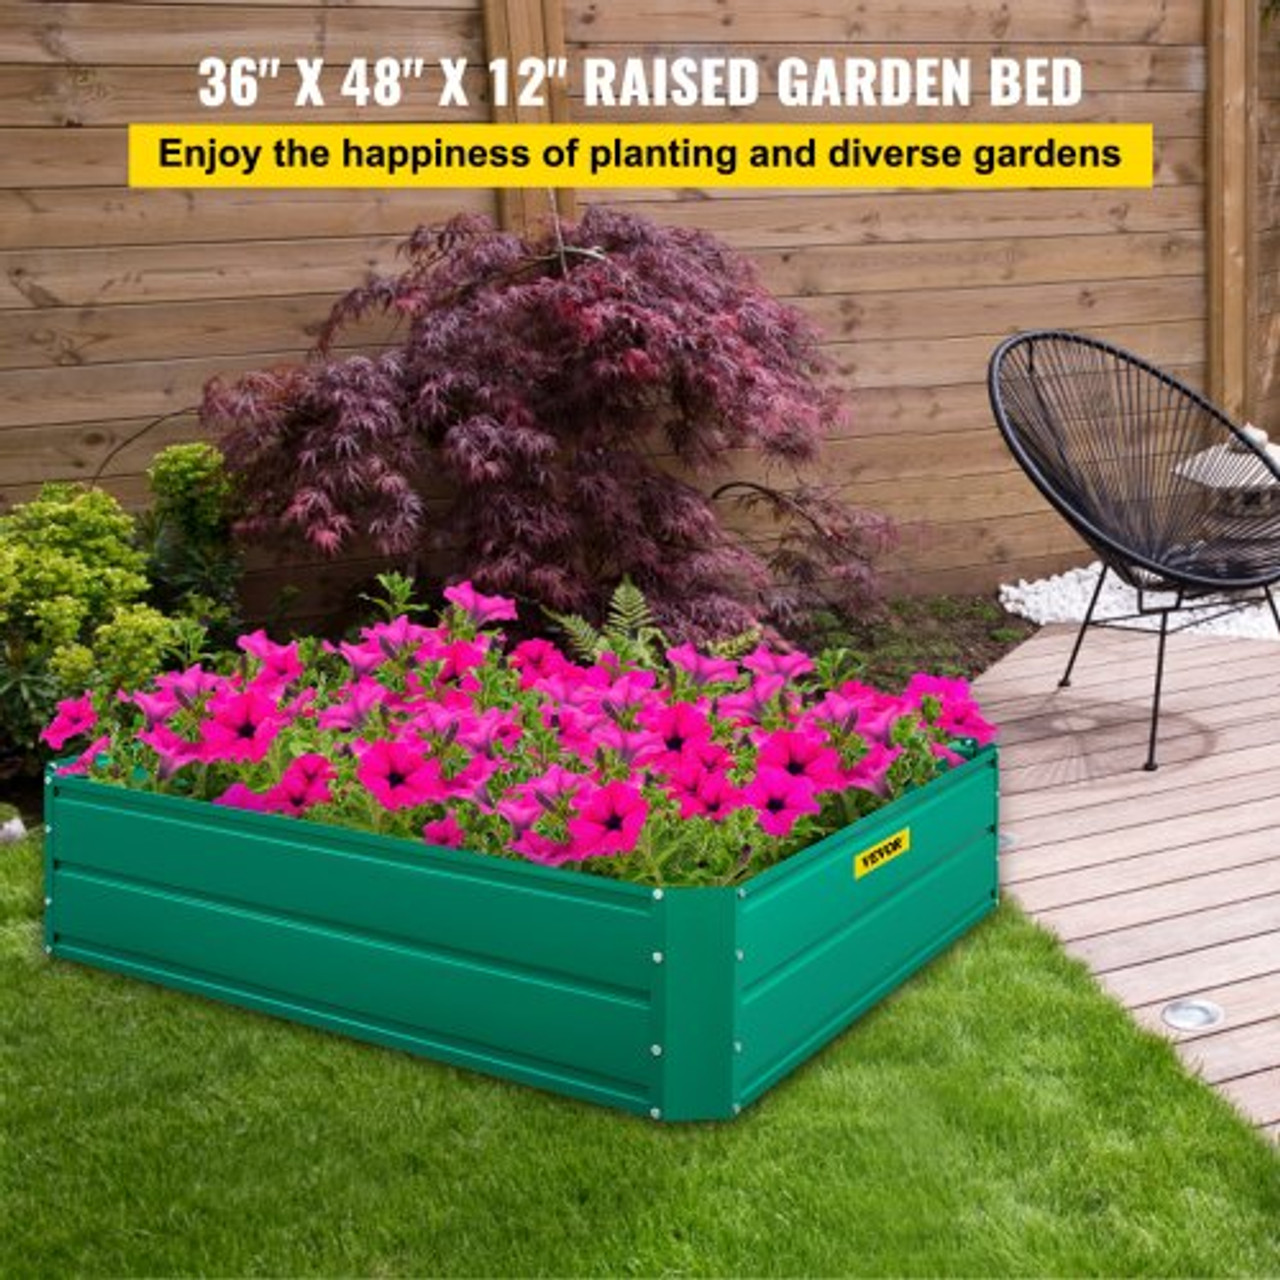 Galvanized Raised Garden Bed, 48" x 36" x 12" Metal Planter Box, Green Steel Plant Raised Garden Bed Kit, Planter Boxes Outdoor for Growing Vegetables,Flowers,Fruits,Herbs,and Succulents